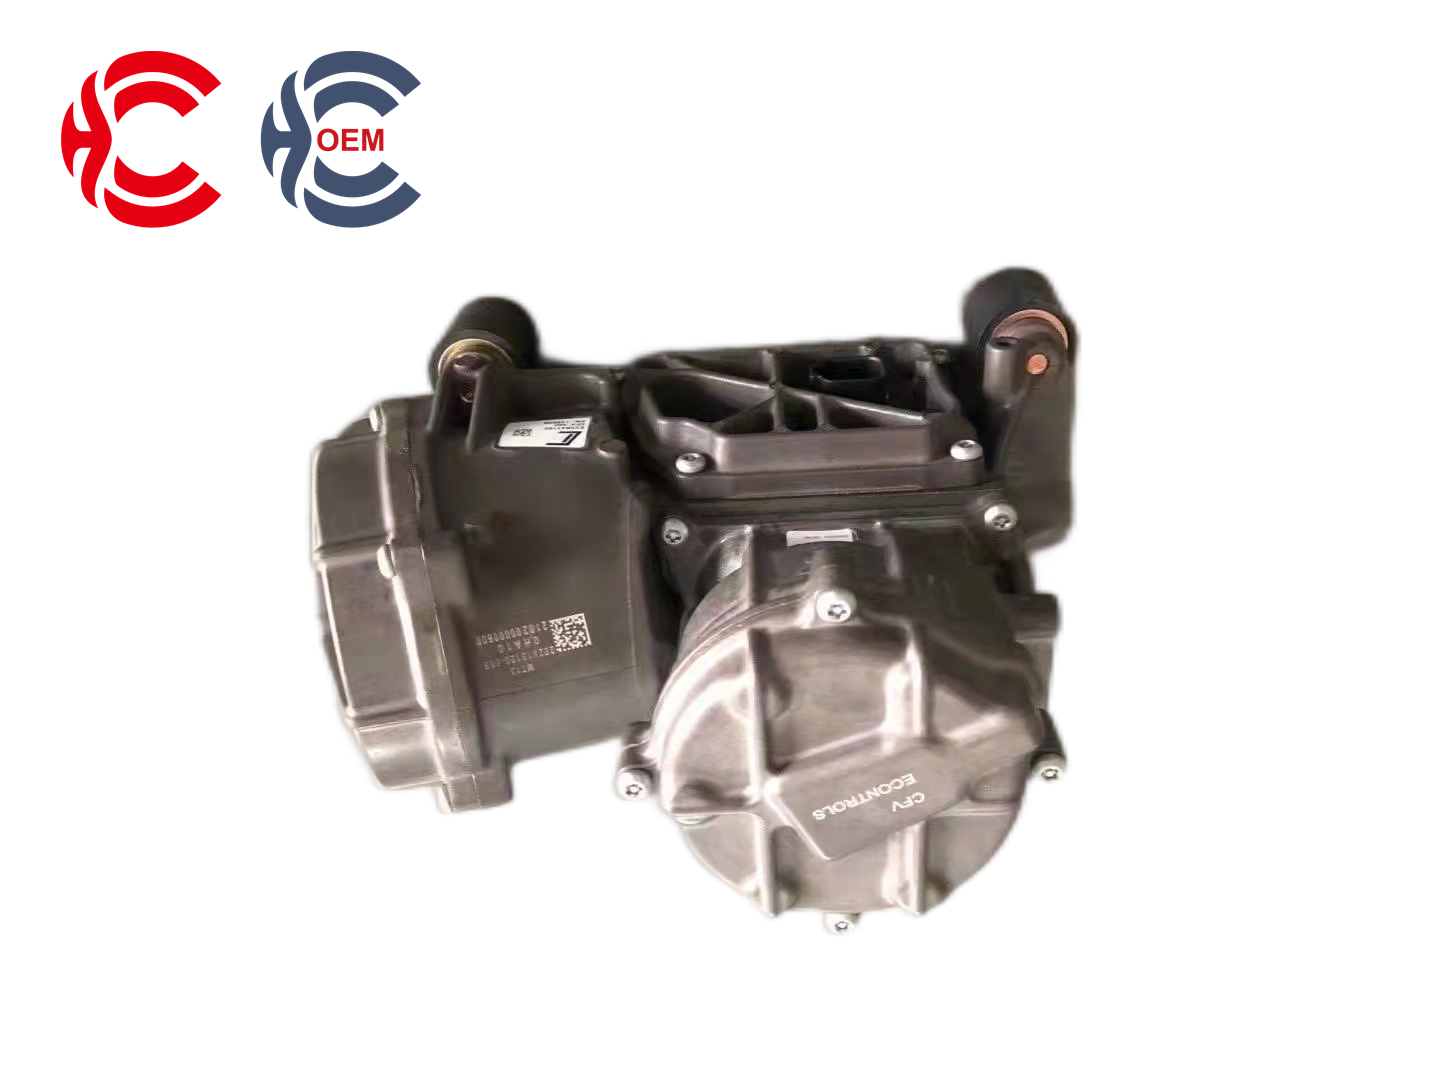 OEM: 202V13120-003Material: ABS MetalColor: black silverOrigin: Made in ChinaWeight: 4000gPacking List: 1* CFV Valve More ServiceWe can provide OEM Manufacturing serviceWe can Be your one-step solution for Auto PartsWe can provide technical scheme for you Feel Free to Contact Us, We will get back to you as soon as possible.